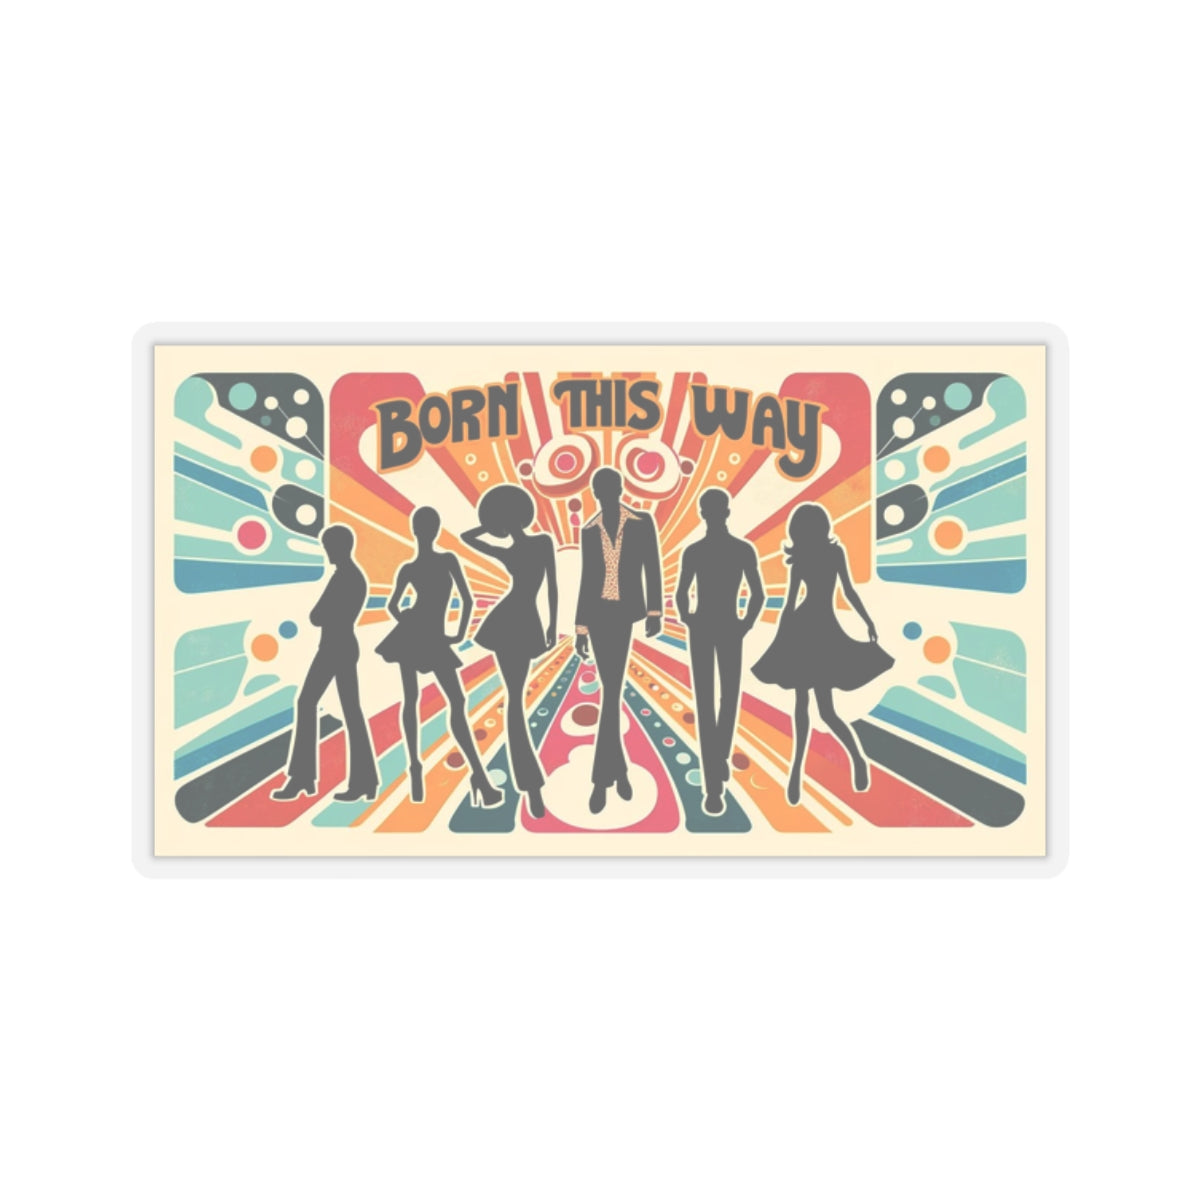 Born This Way! Inspirational Caring Statement vinyl Sticker: for laptop, kindle, phone, ipad, instrument case, notebook, or water bottle